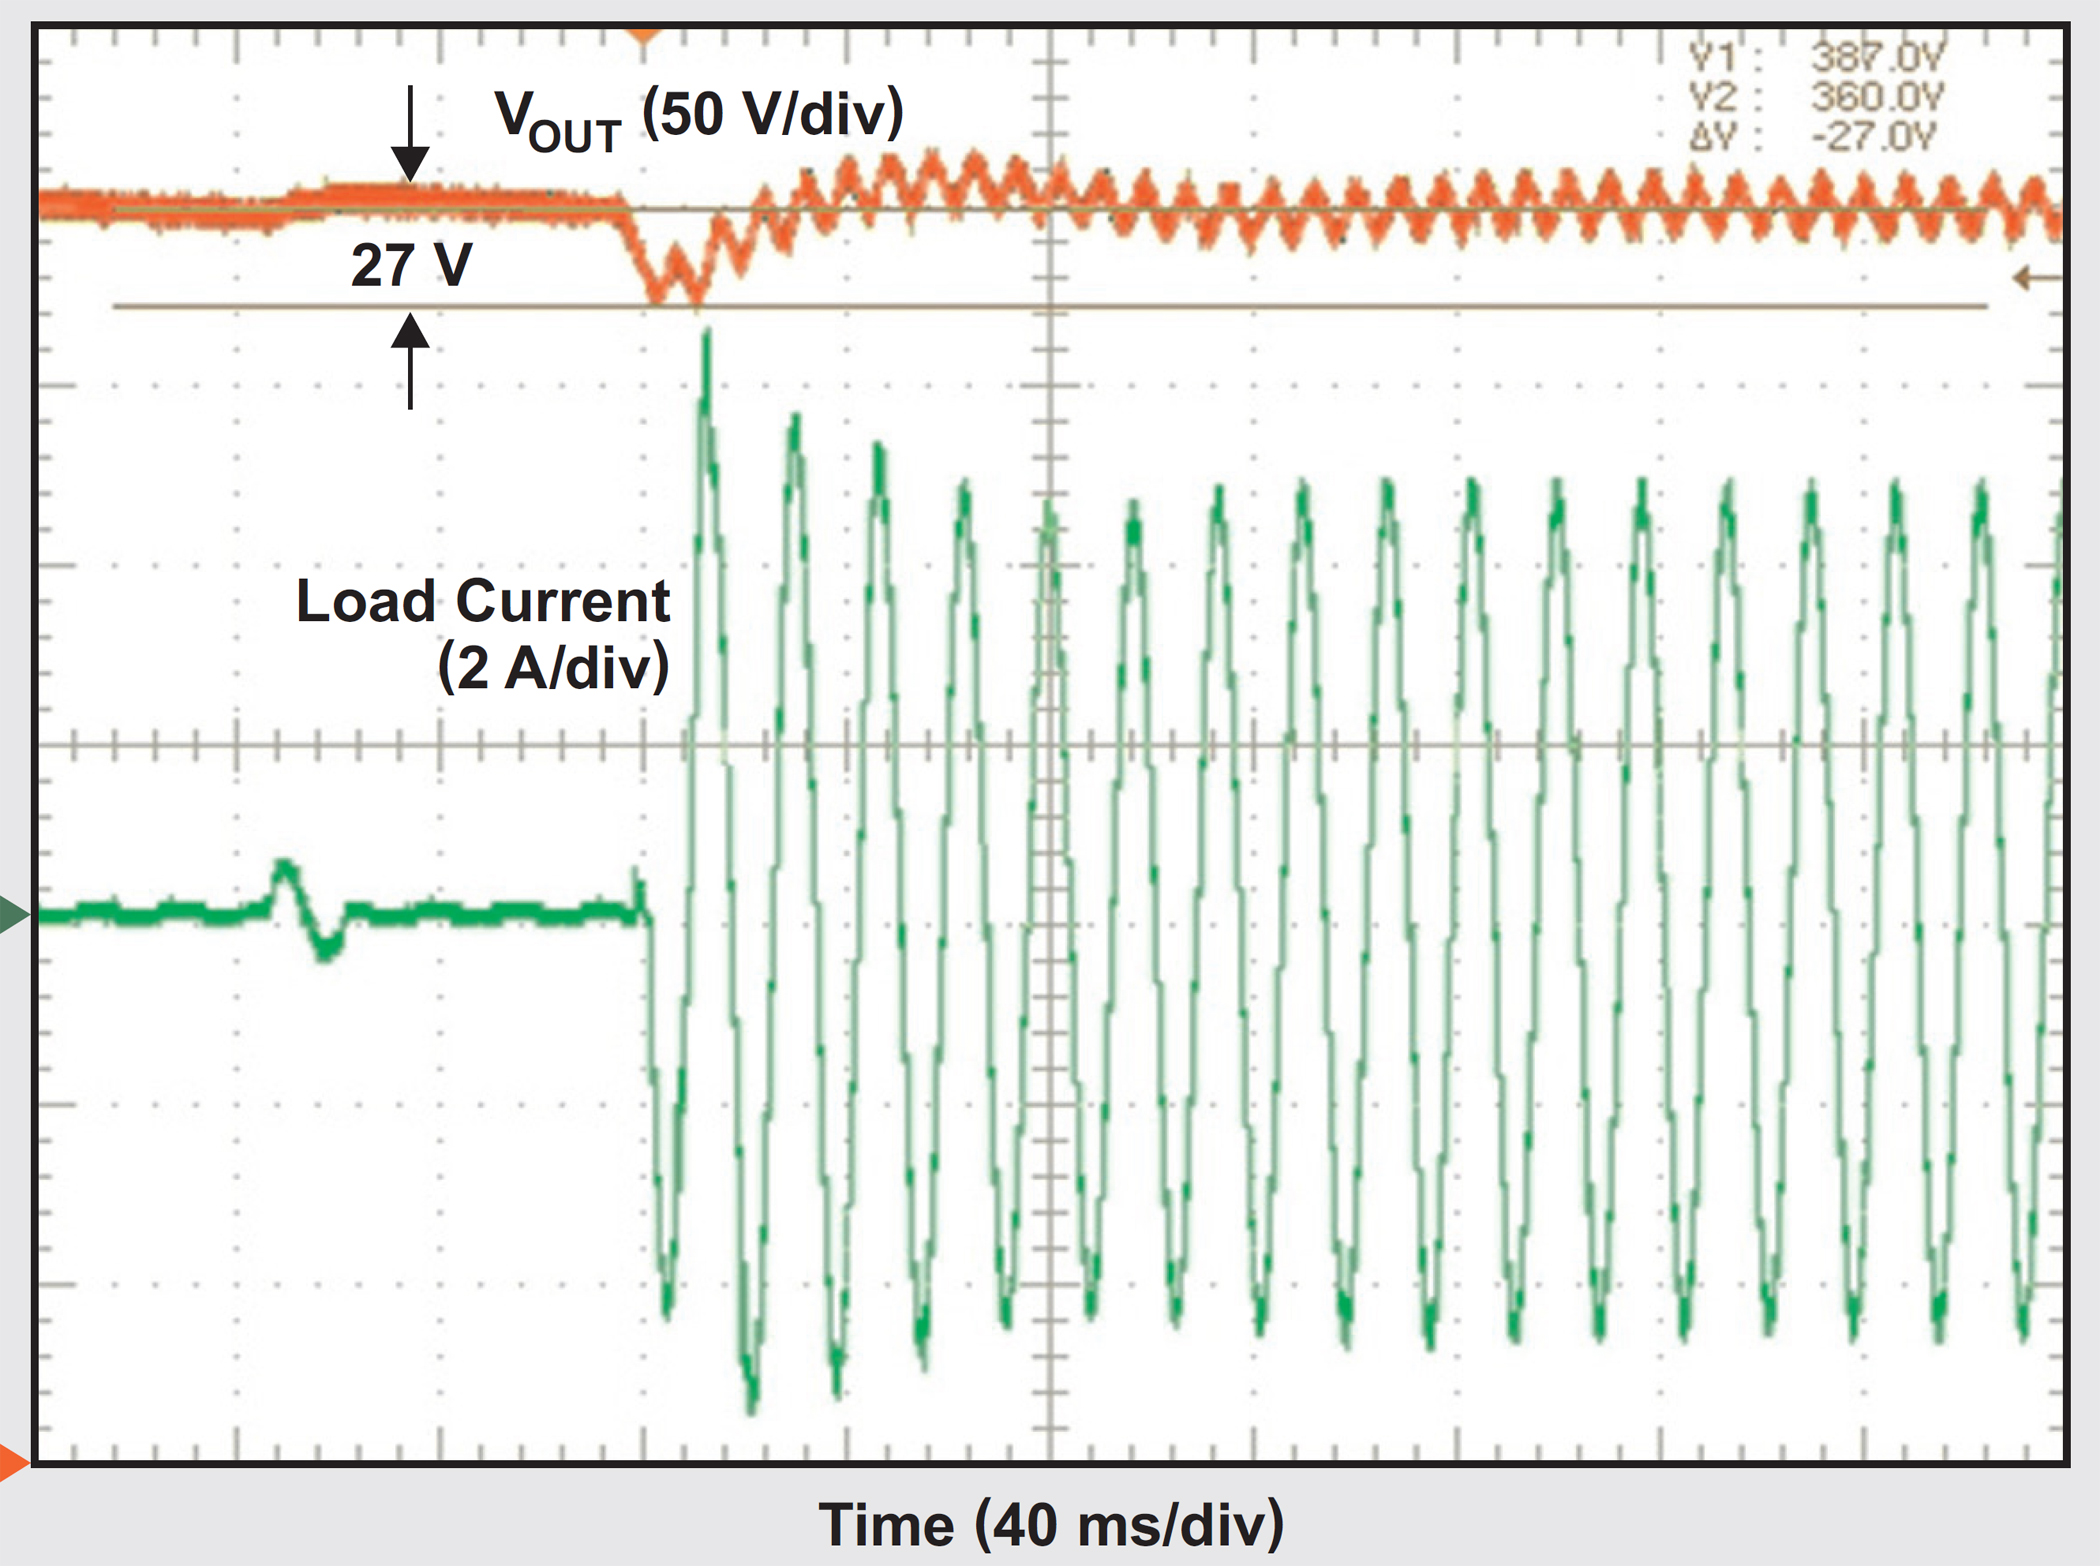 Figure 4: Load transient from 0 – 100 percent during AC cycle-skipping. Channel 1 is VOUT, Channel 4 is AC current